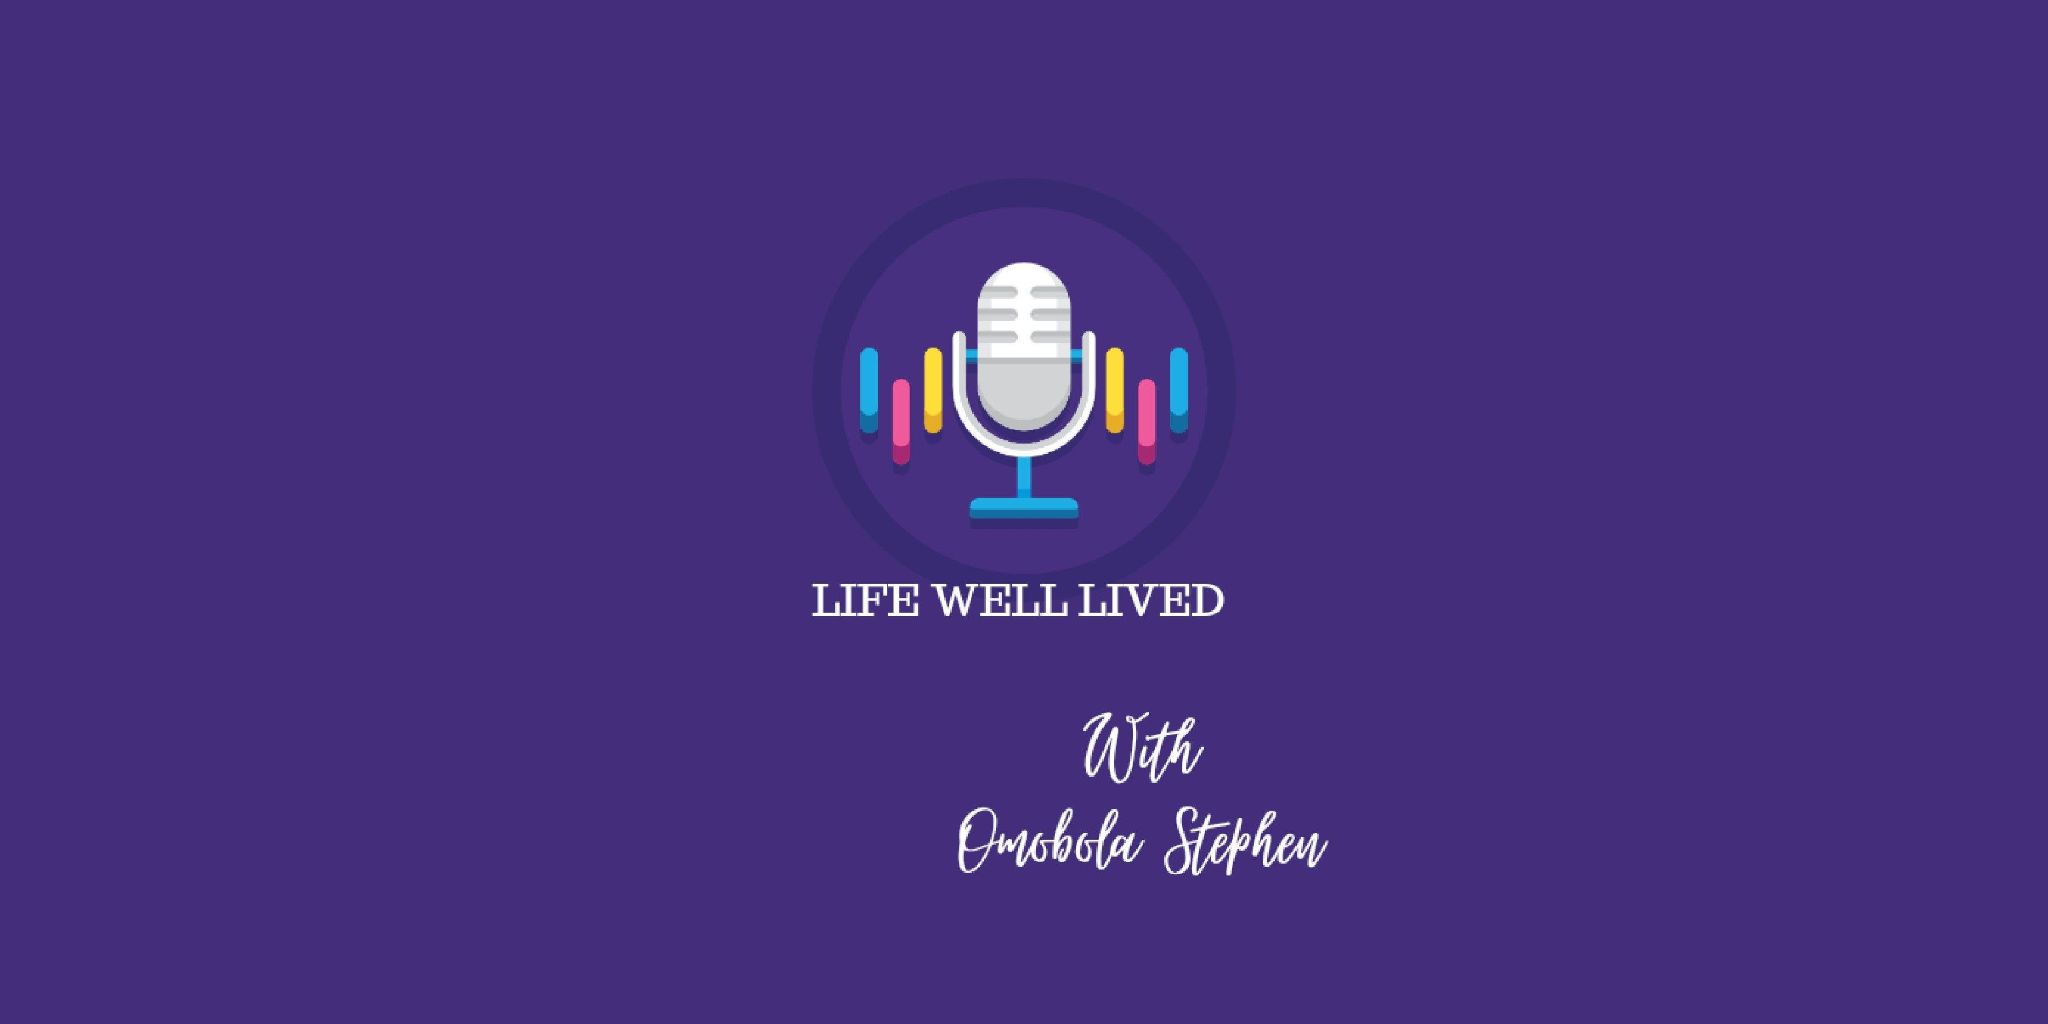 Life Well Lived Podcast and Host Omobola Stephen